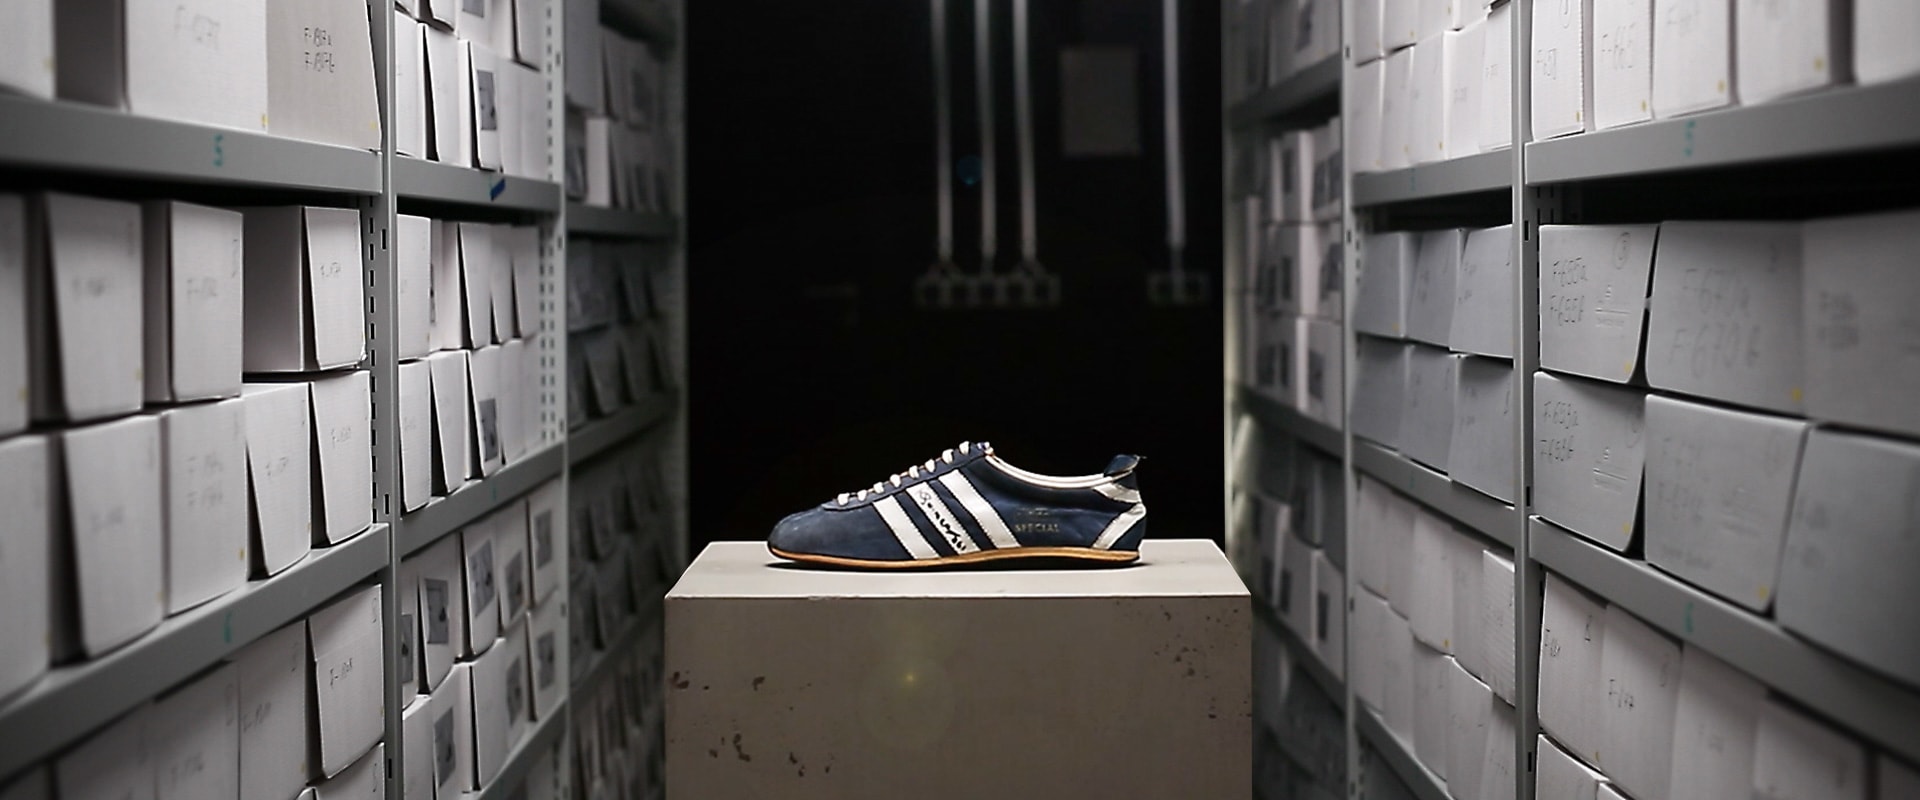 the first adidas shoe